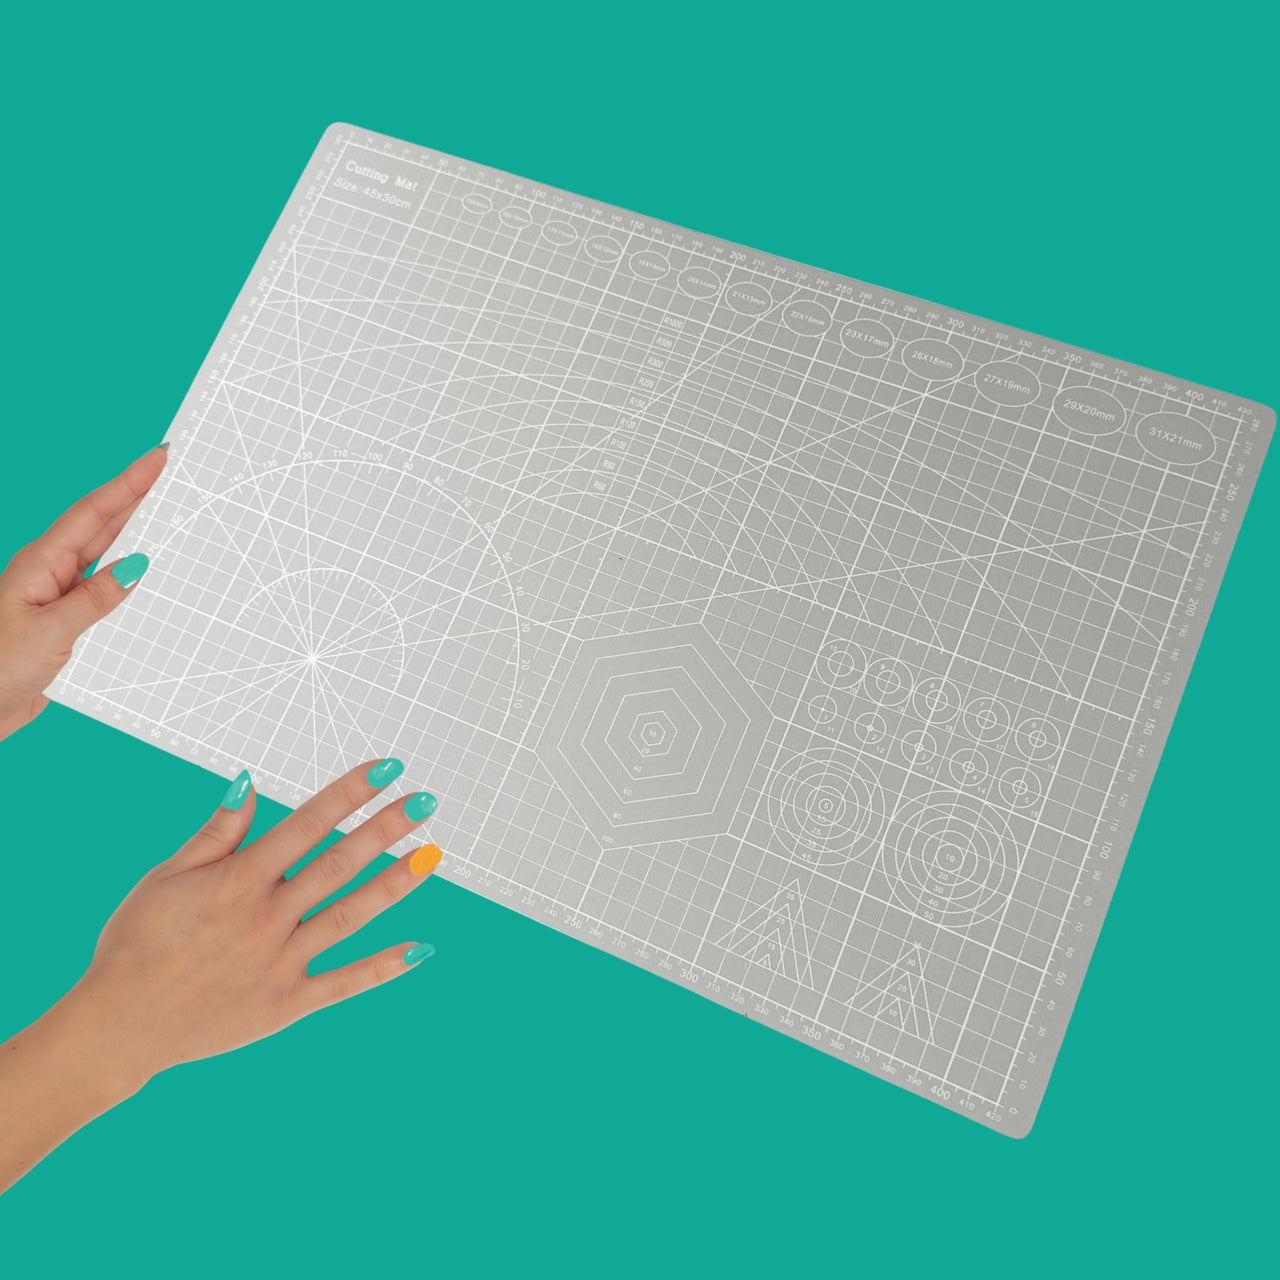 A3 self-healing cutting mat with grid